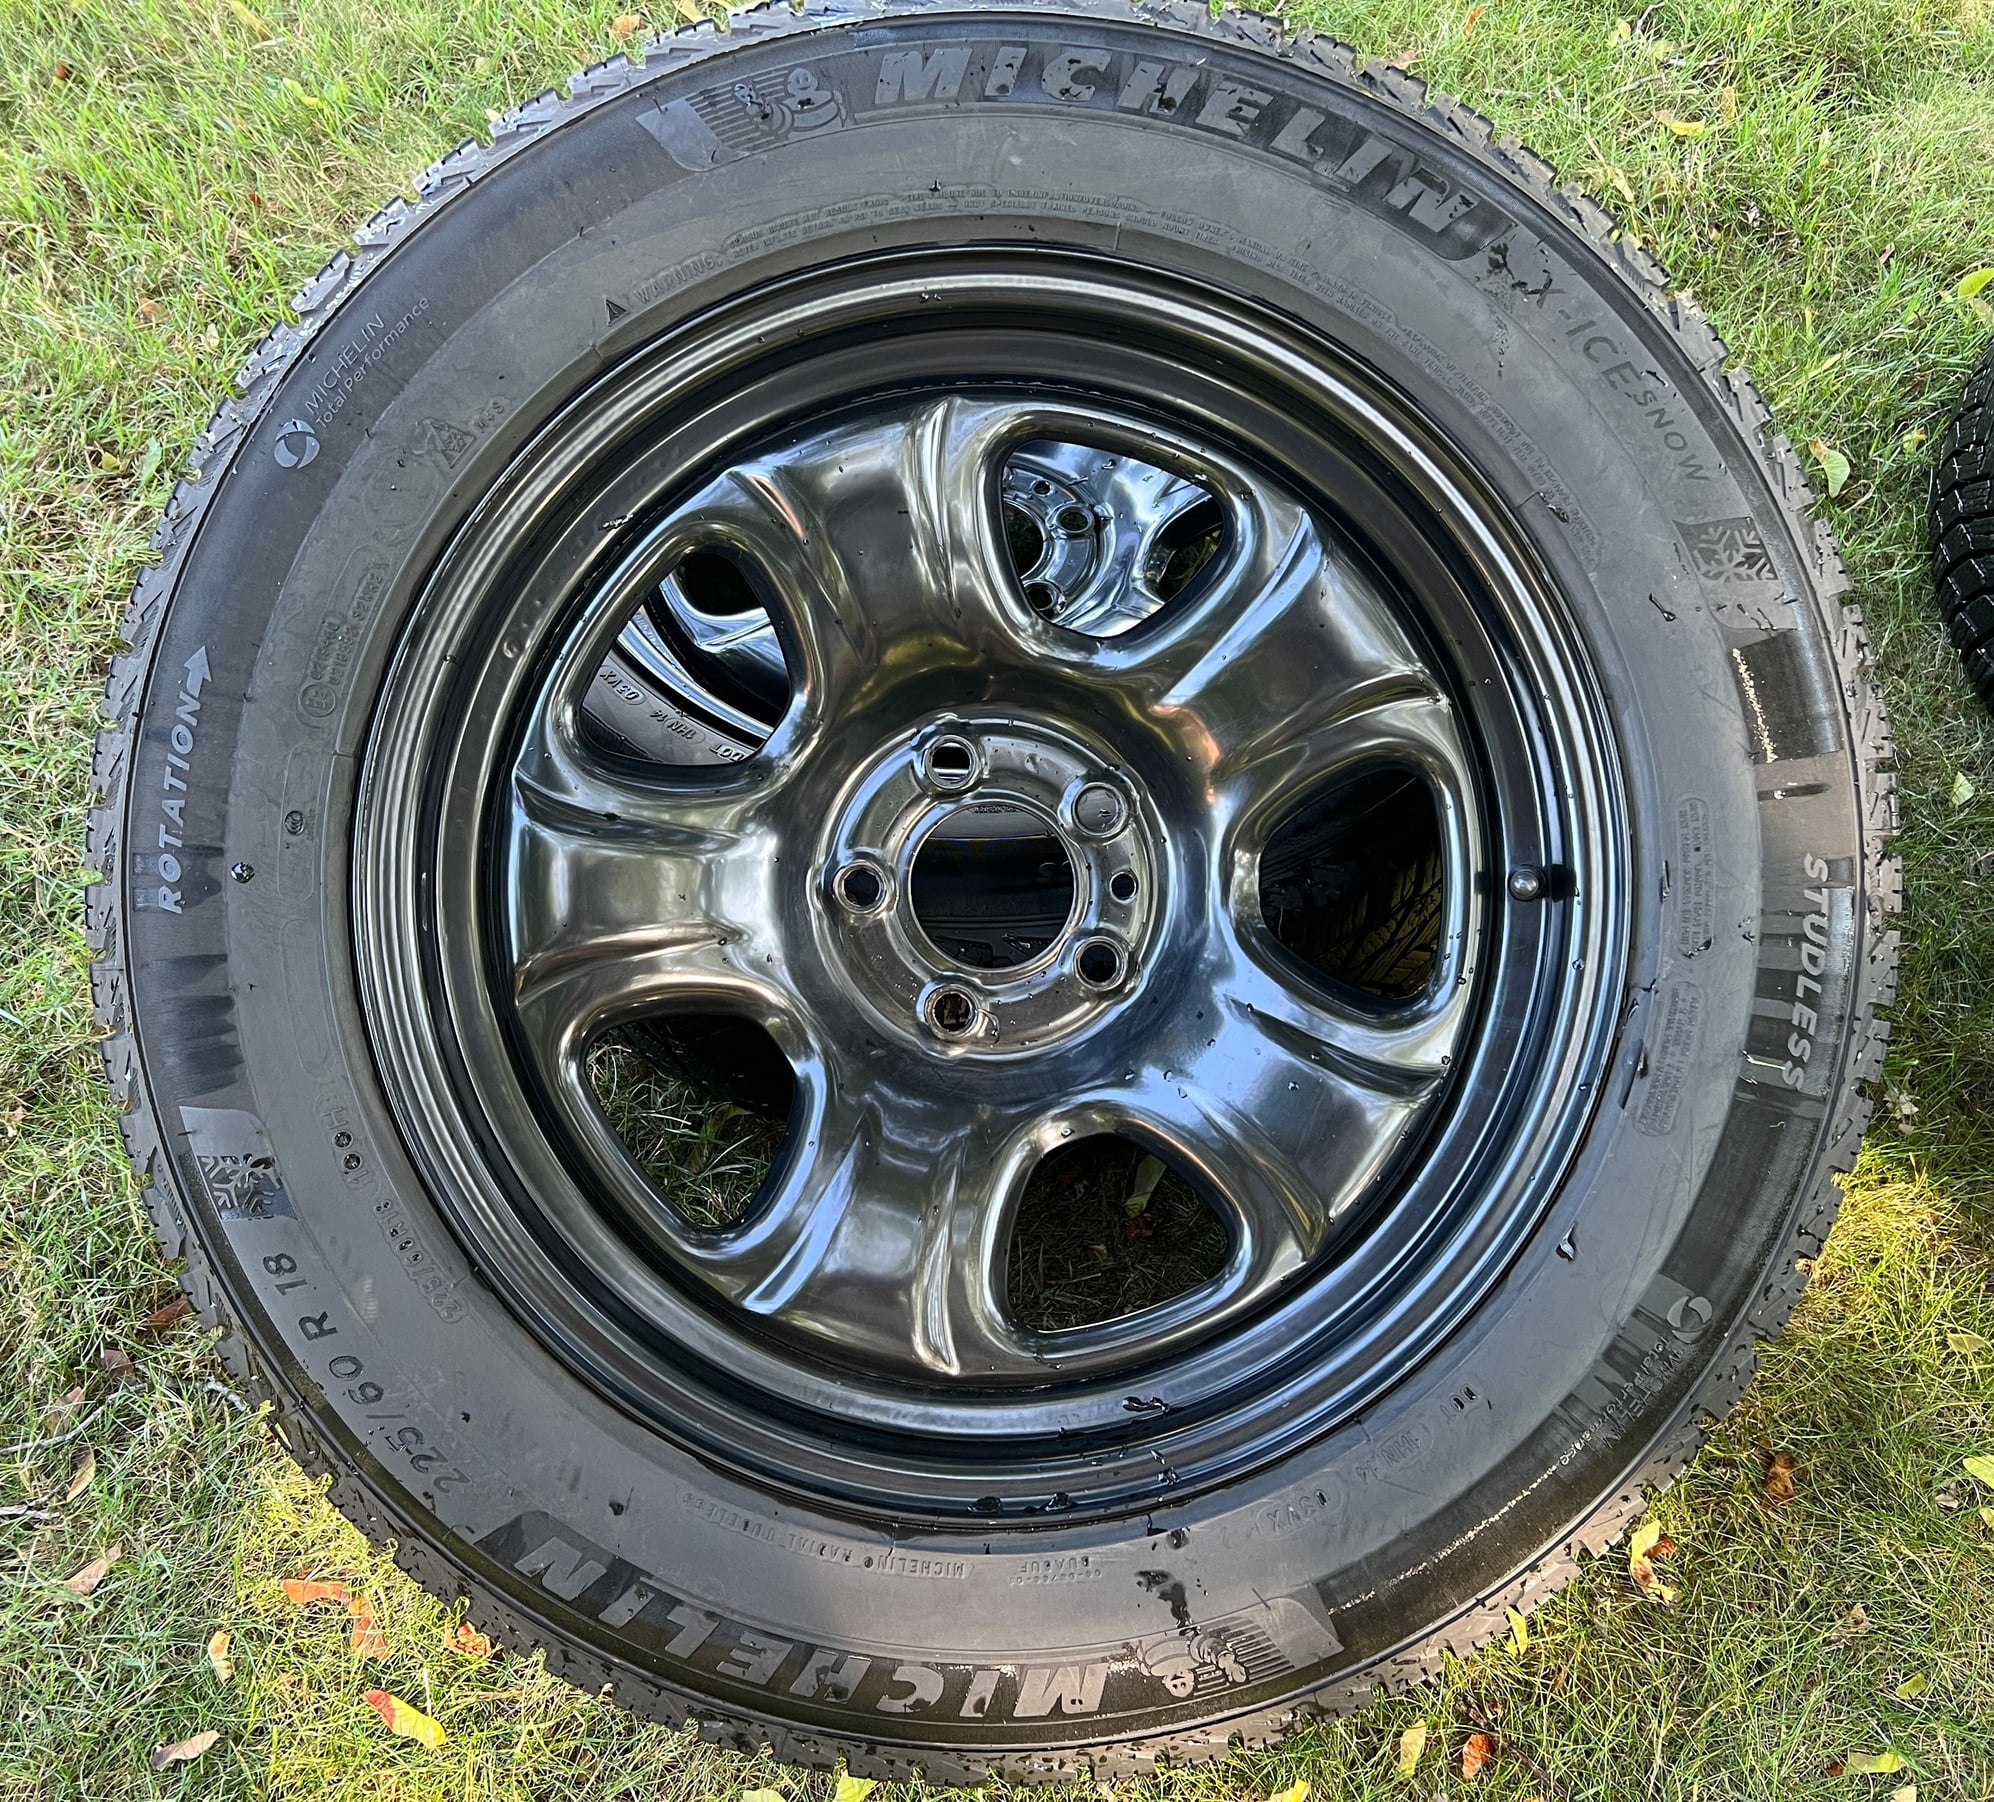 Wheels and Tires/Axles - Chrysler 300 Winter Wheels and Tires - Used - 2005 to 2016 Chrysler 300 - Burlington, ON L7P2M4, Canada